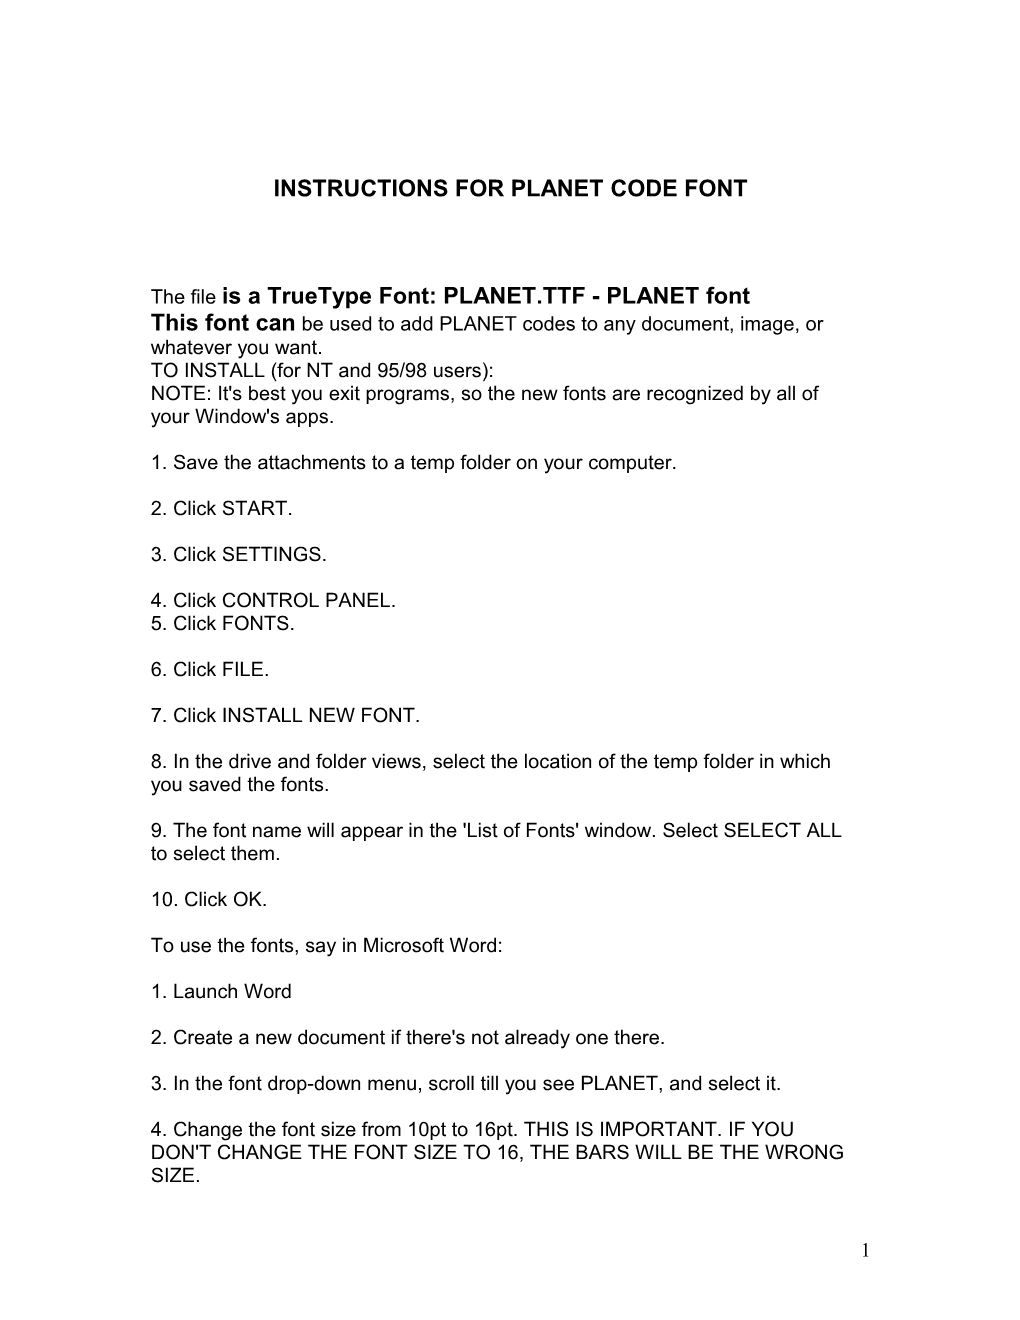 Instructions for Planet Code Font